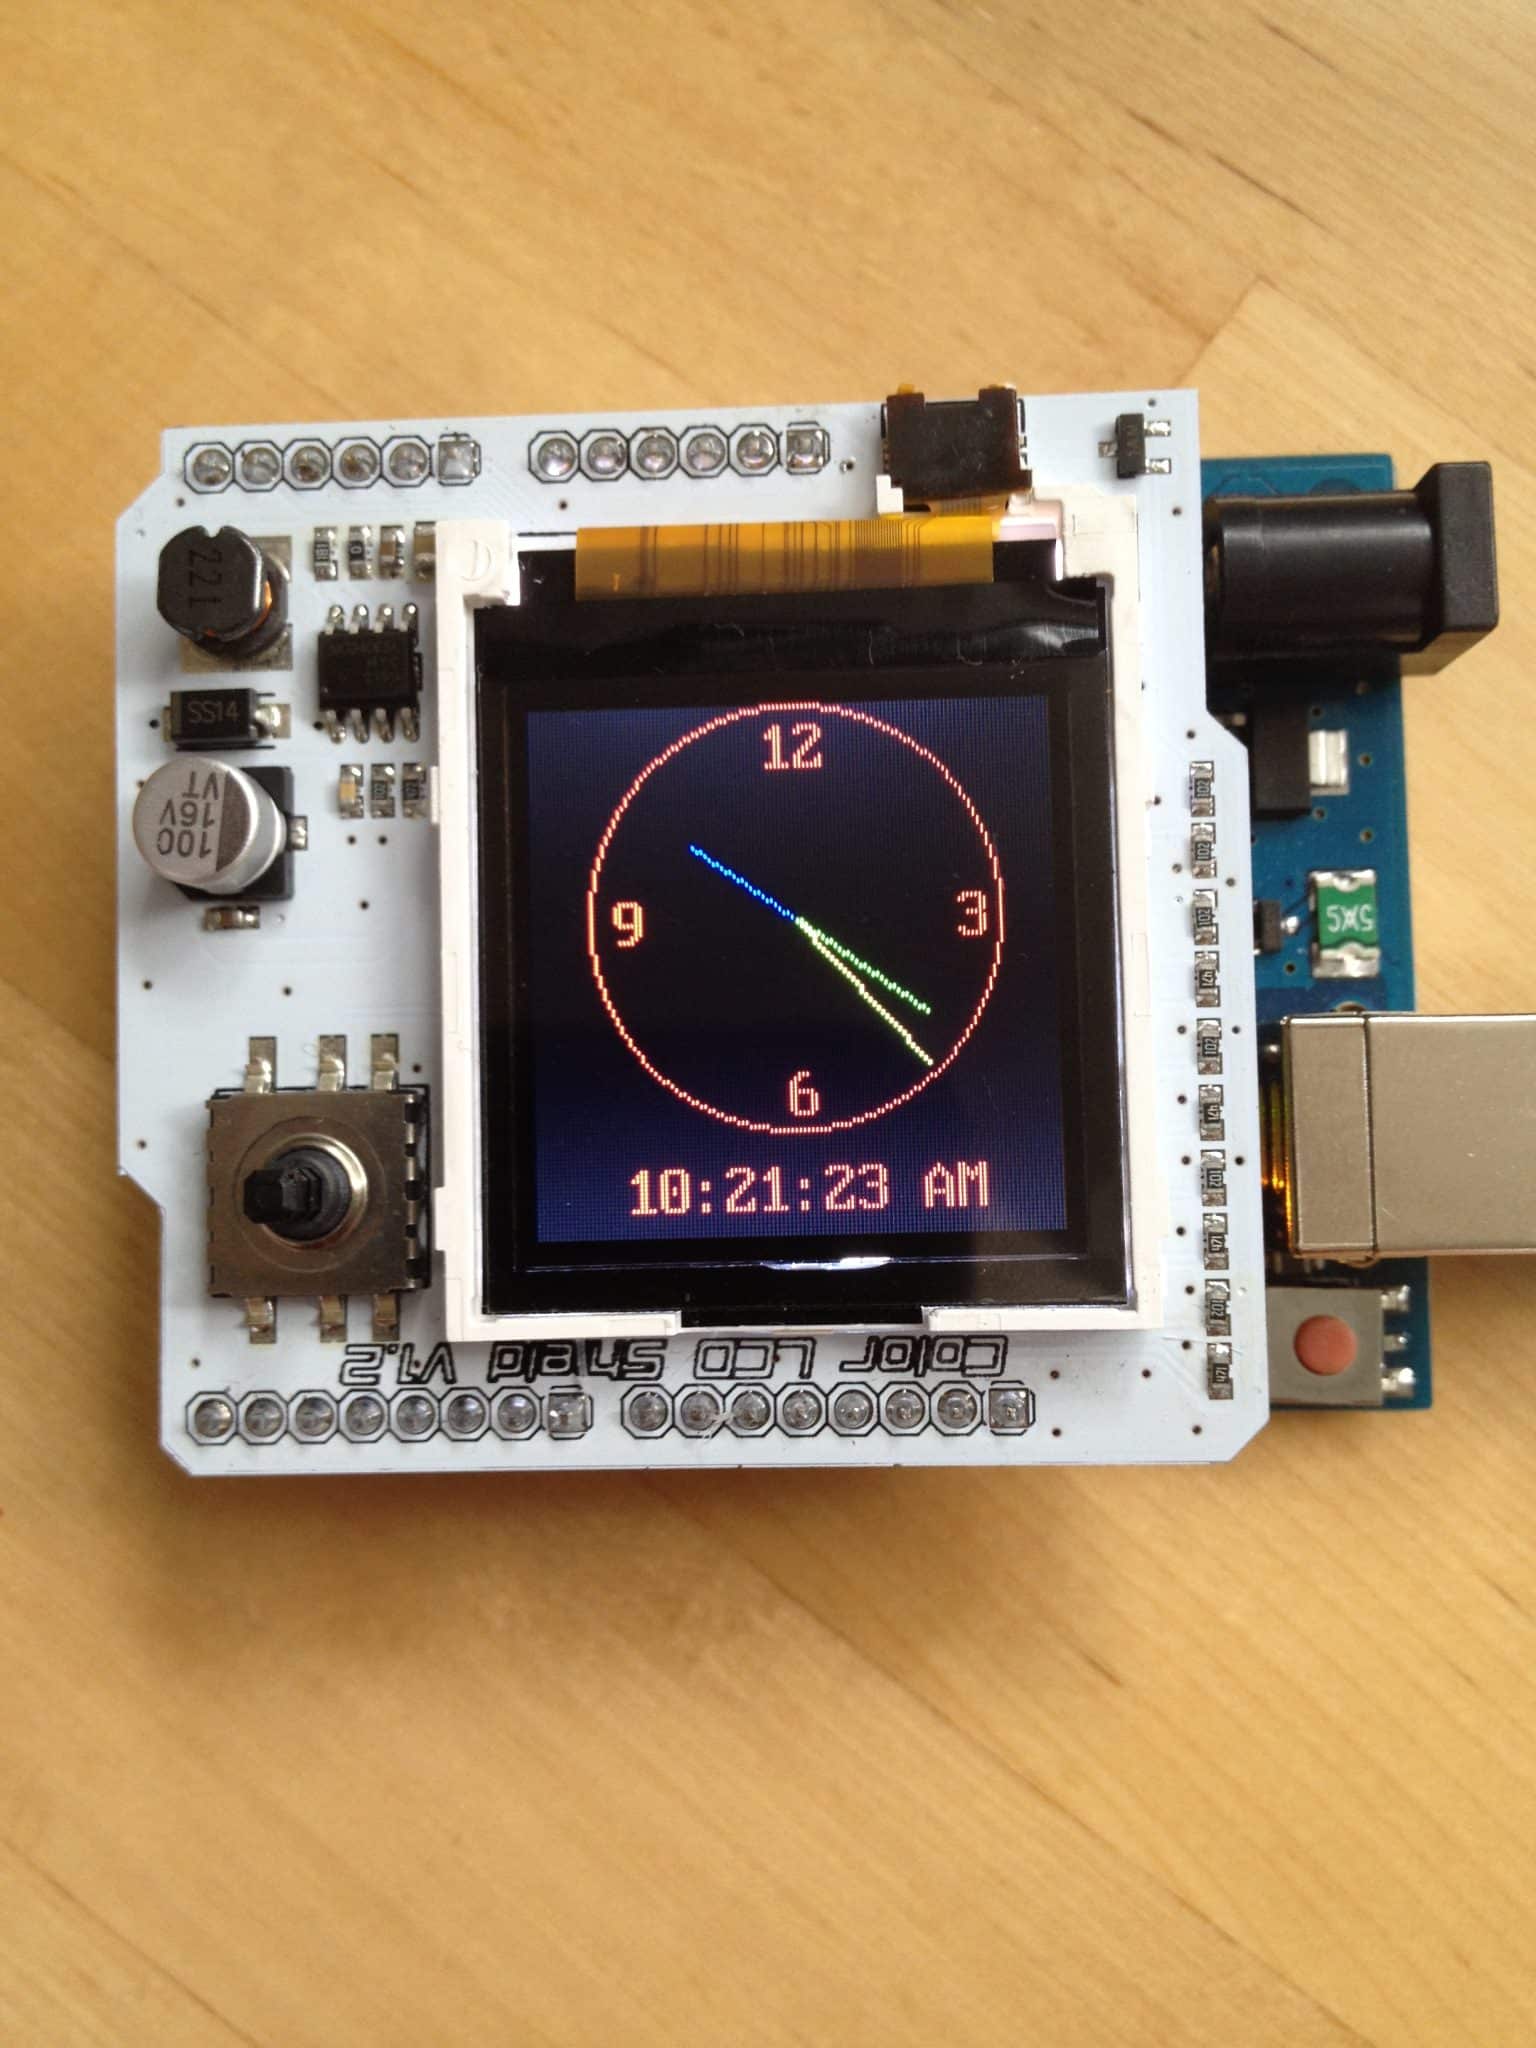 A clock image on a TFT display